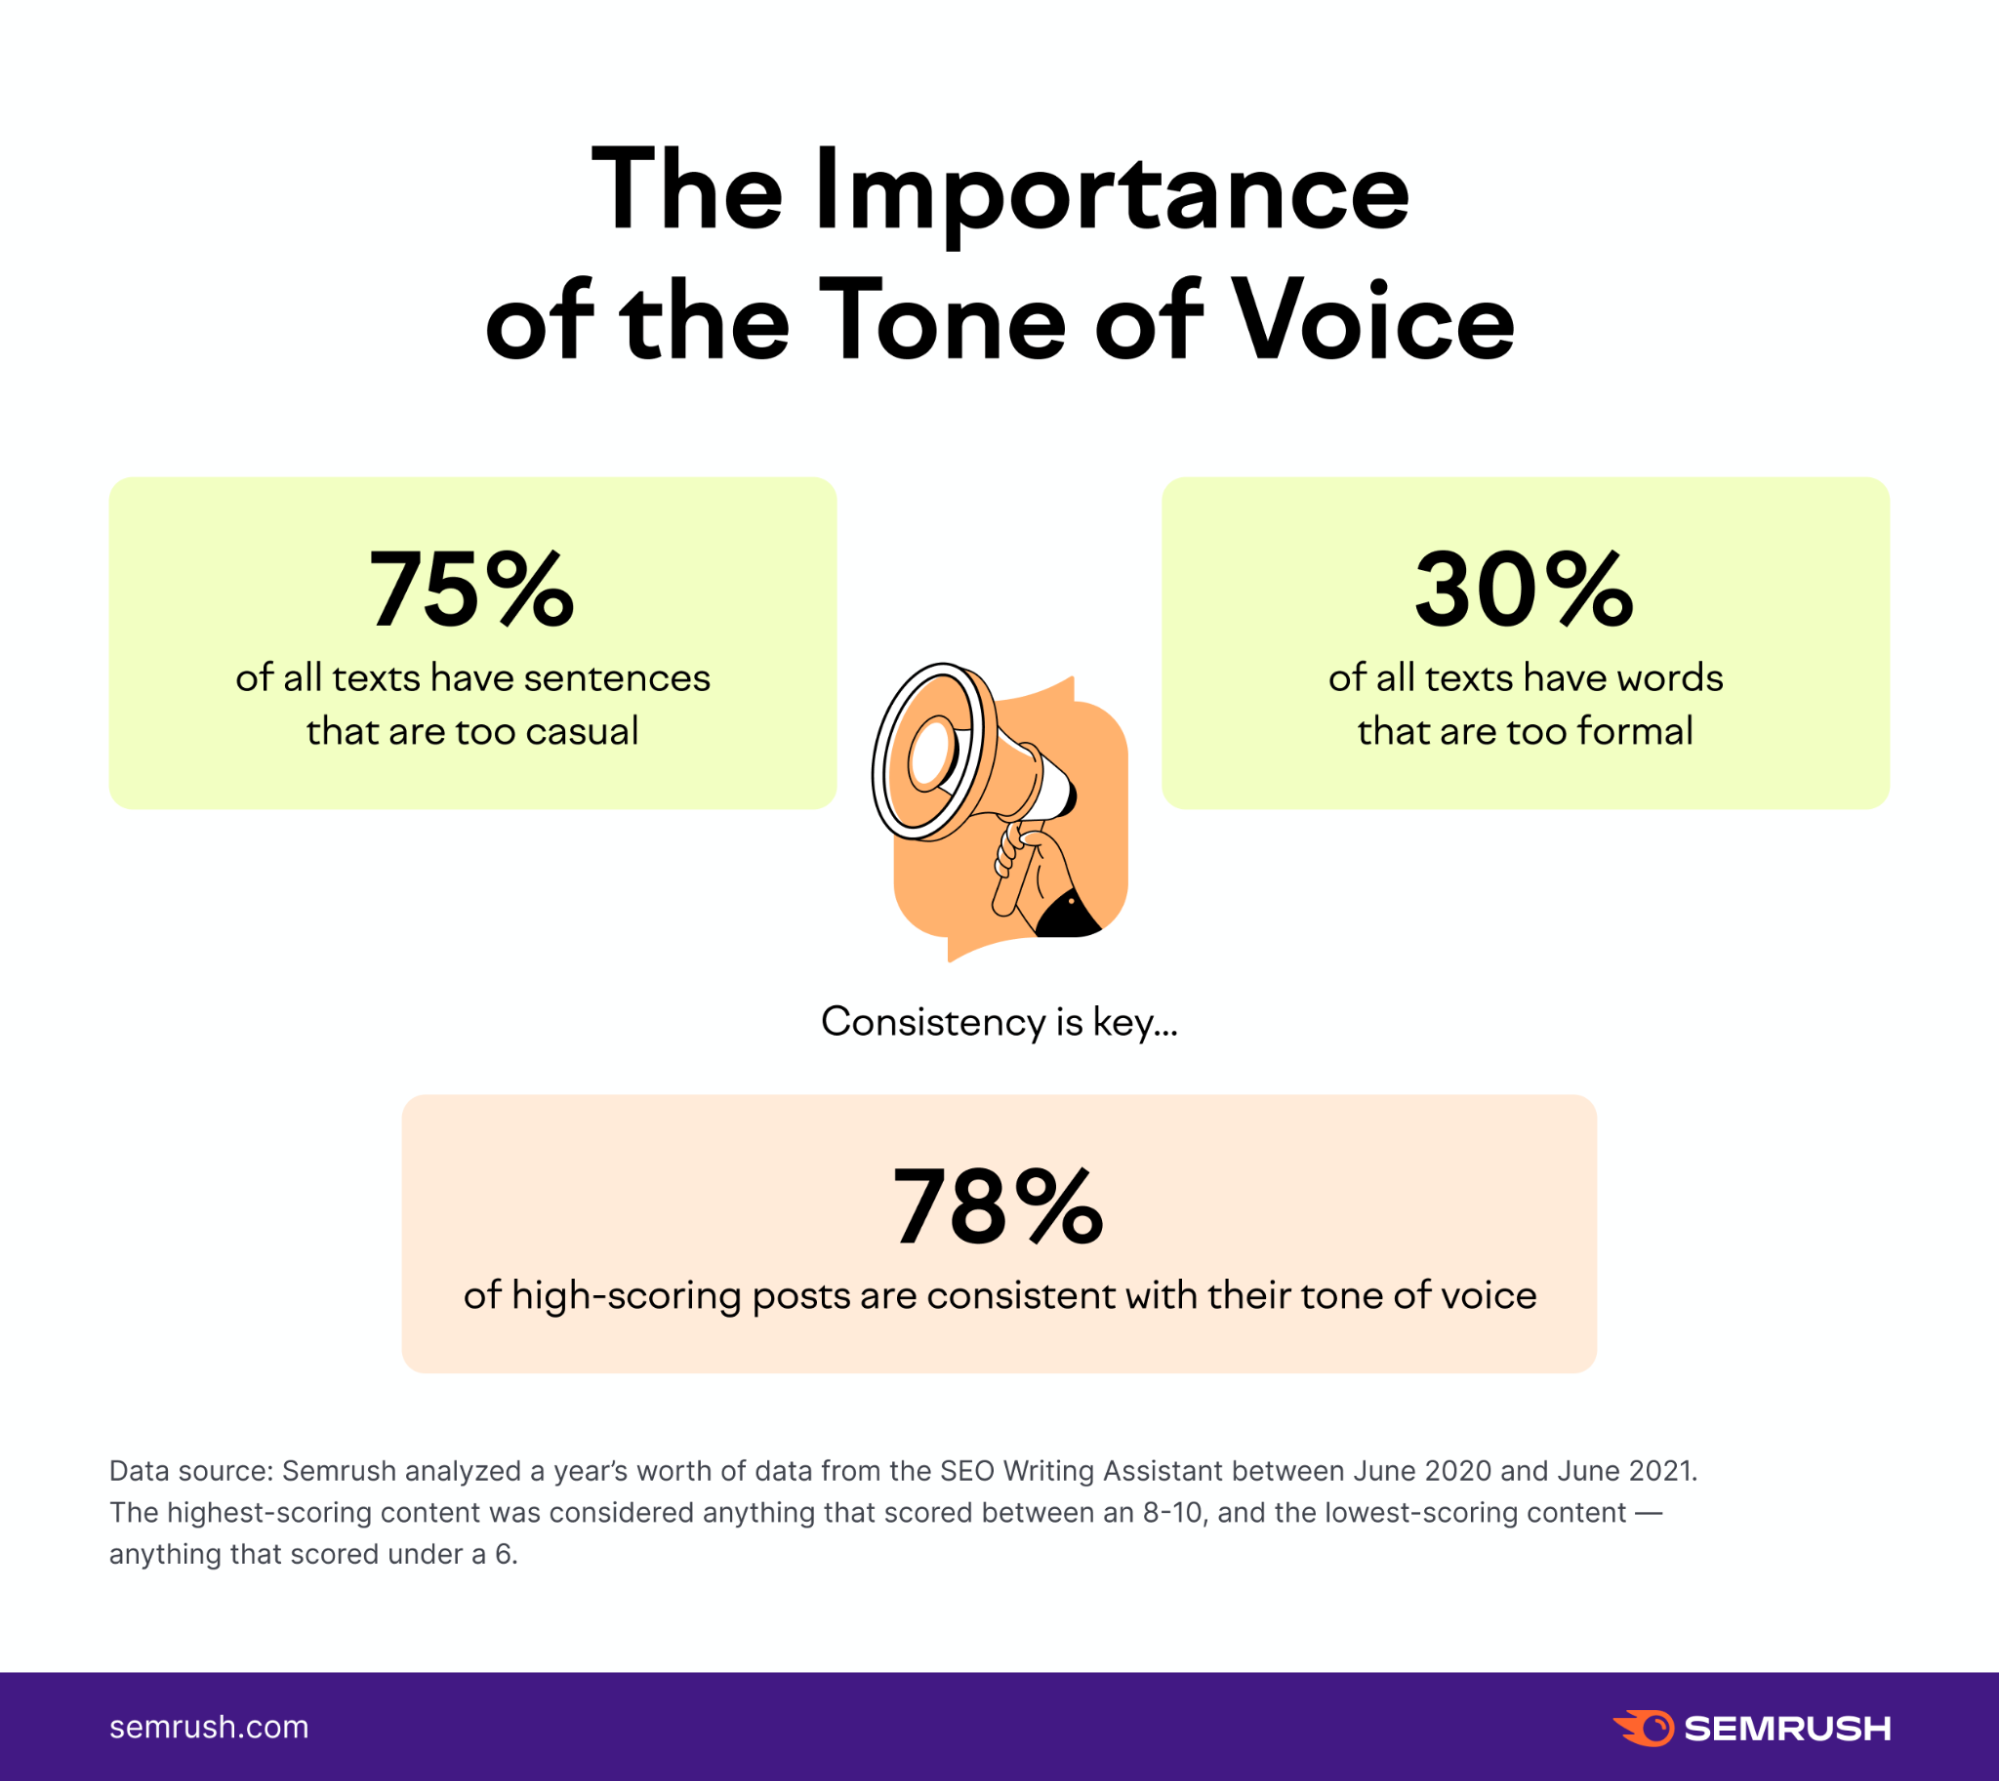 statistics - the important of the tone of voice